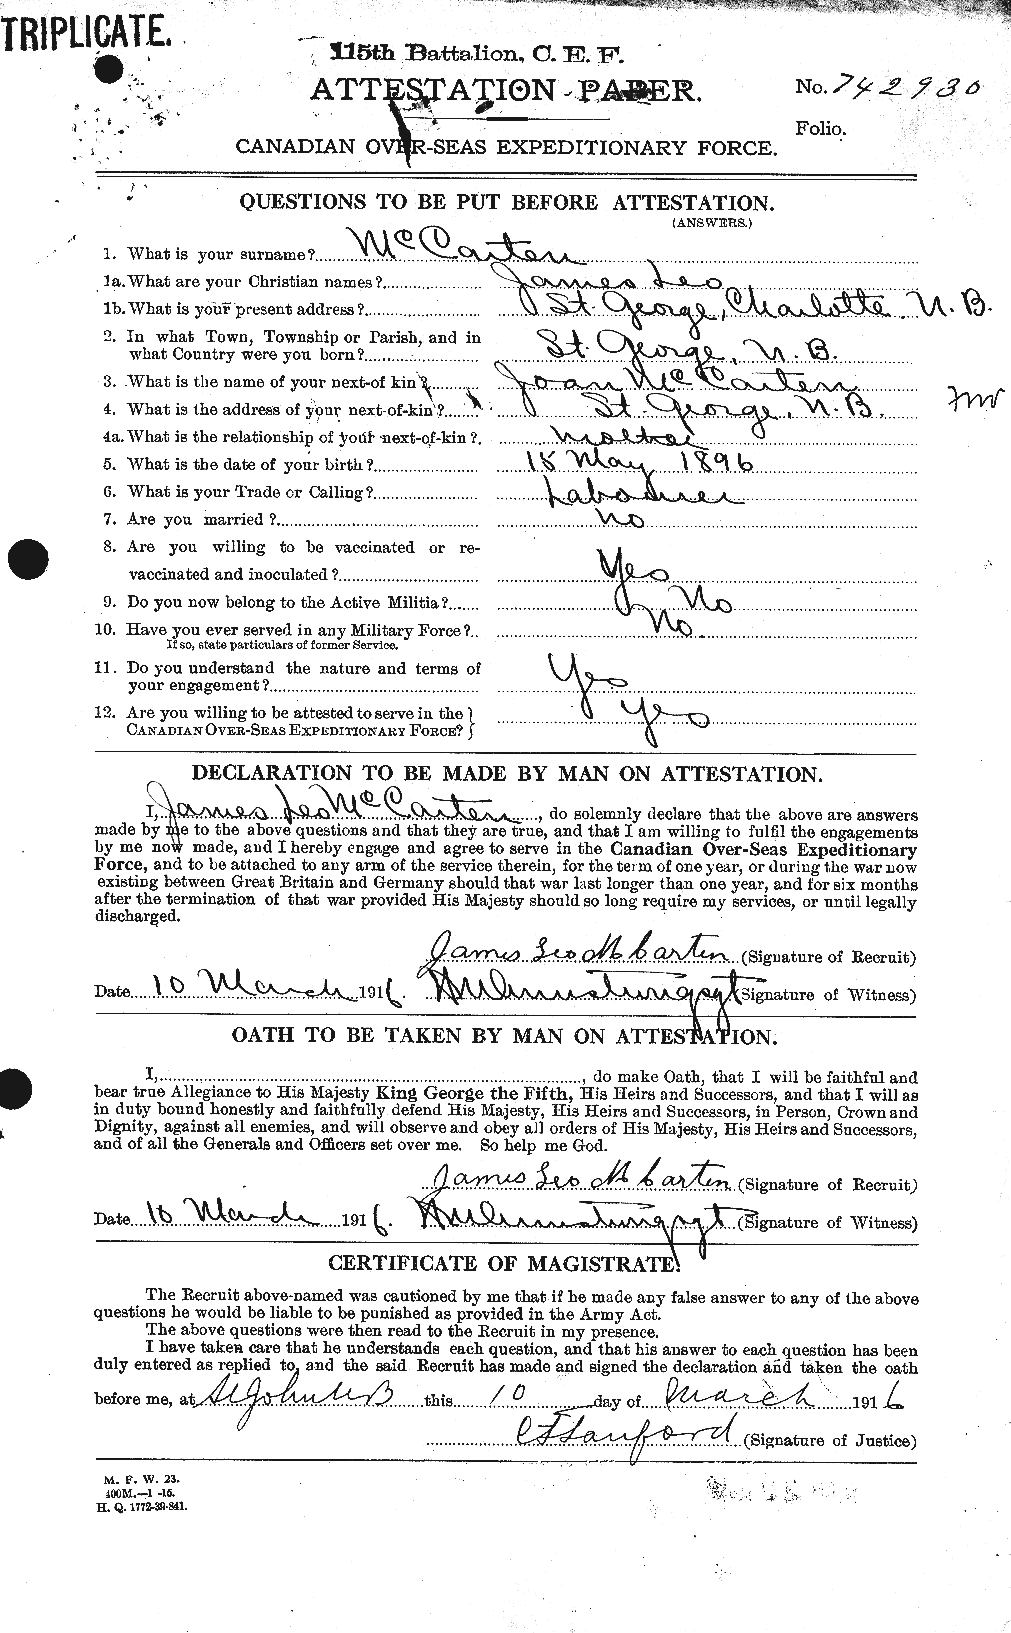 Personnel Records of the First World War - CEF 132430a